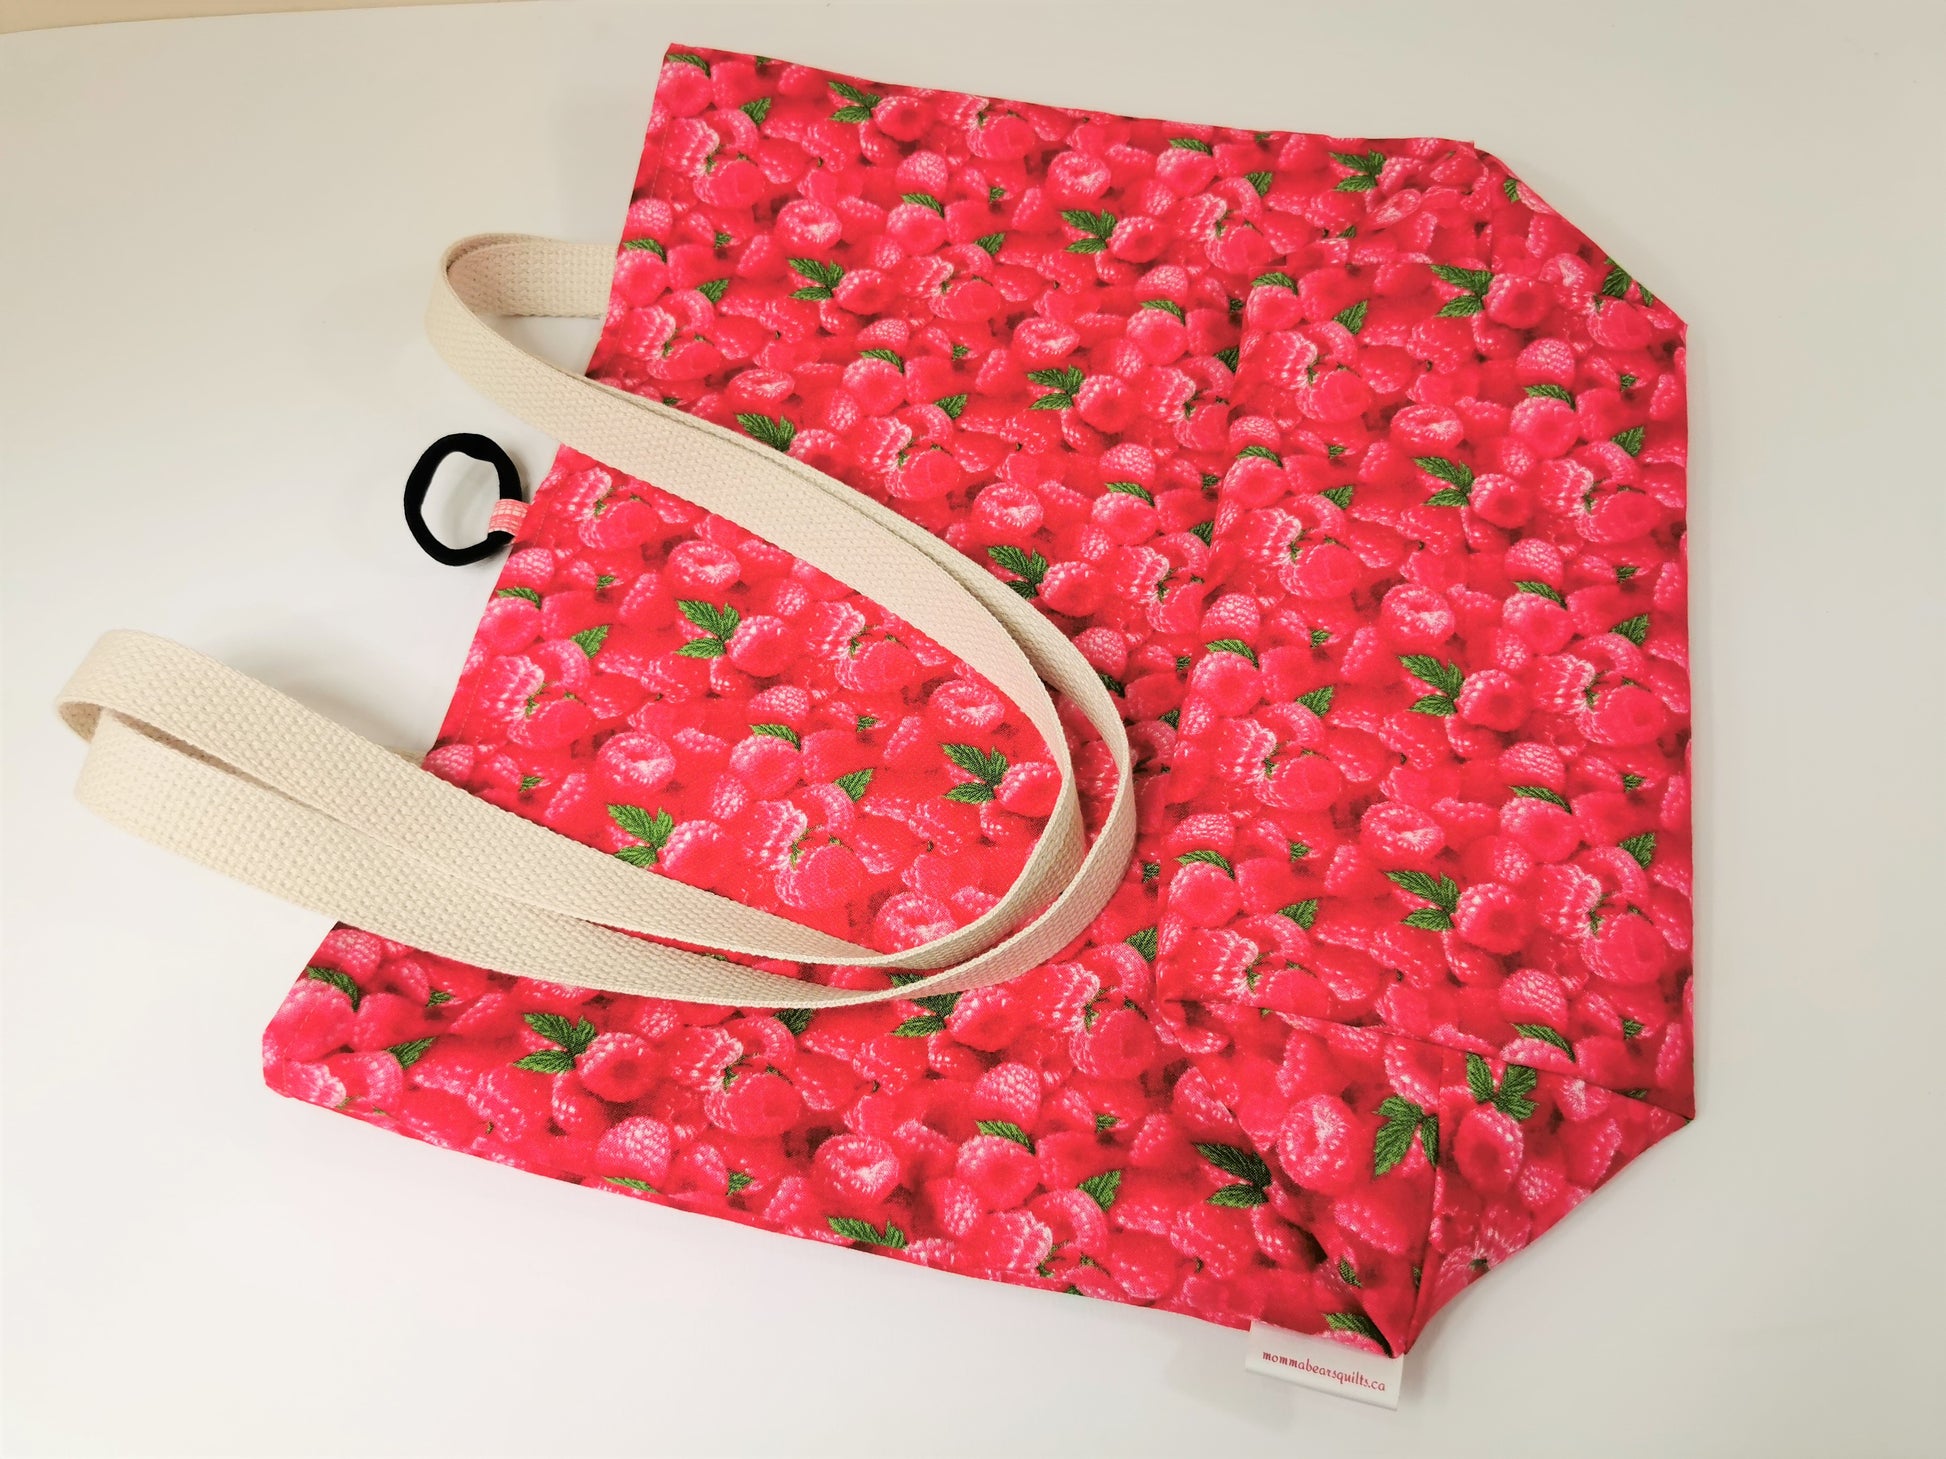 basic tote bag, large reusable cotton shopping bag, compact for purse, sturdy with two layers of fabric, pink raspberry theme fabric